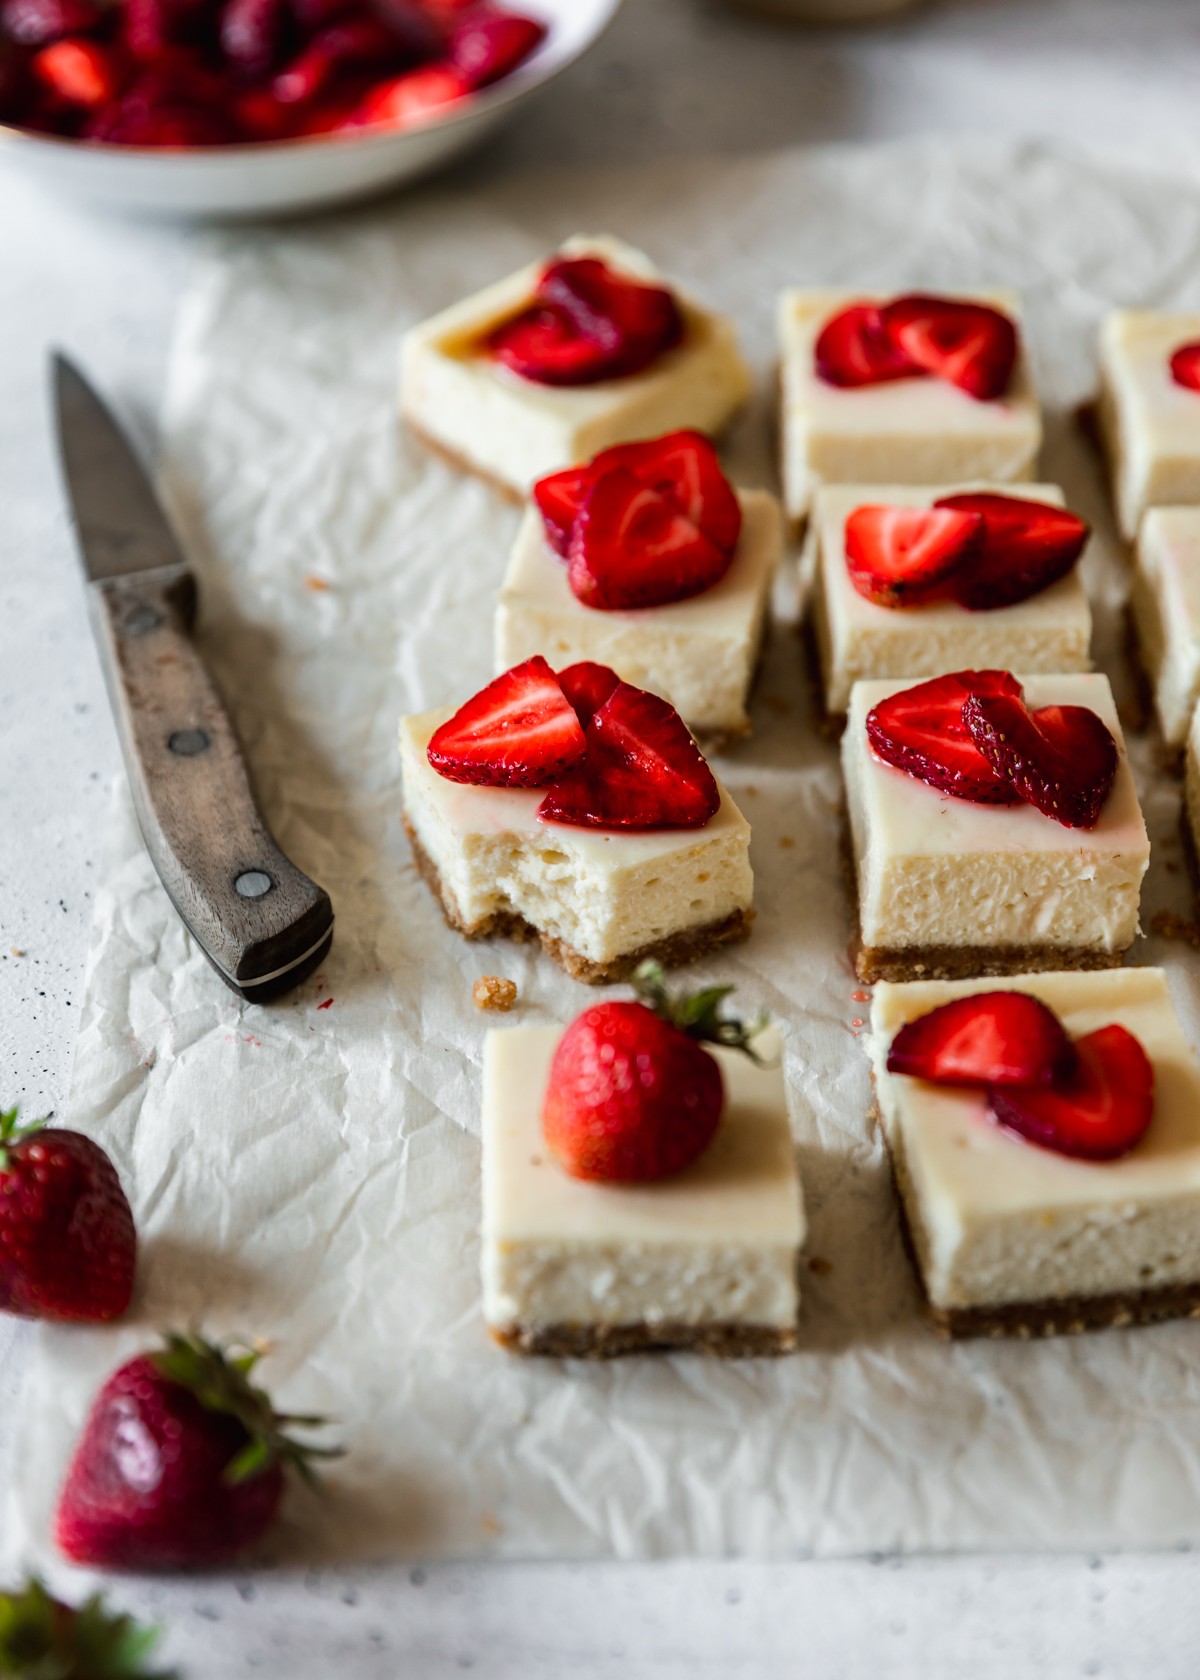 Two rows of strawberry cheesecake bars on white parchment paper next to a wooden knife and white bowl of strawberries on a white speckled table. The second bar on the left has a bite taken out of it.